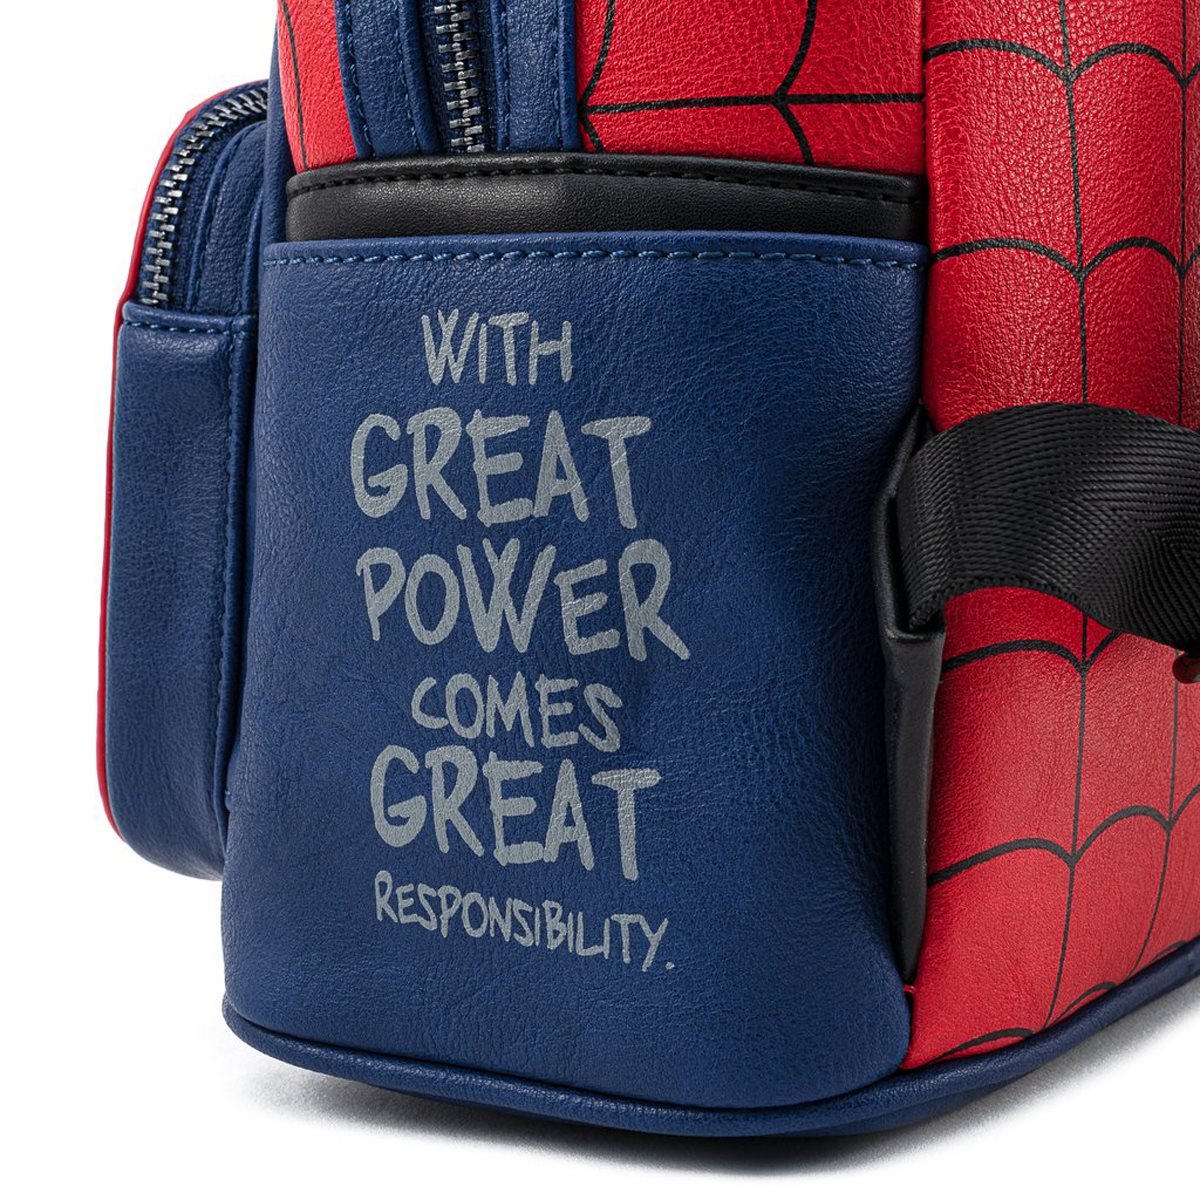 Spider-Man Faux Fur Loungefly Mini Backpack